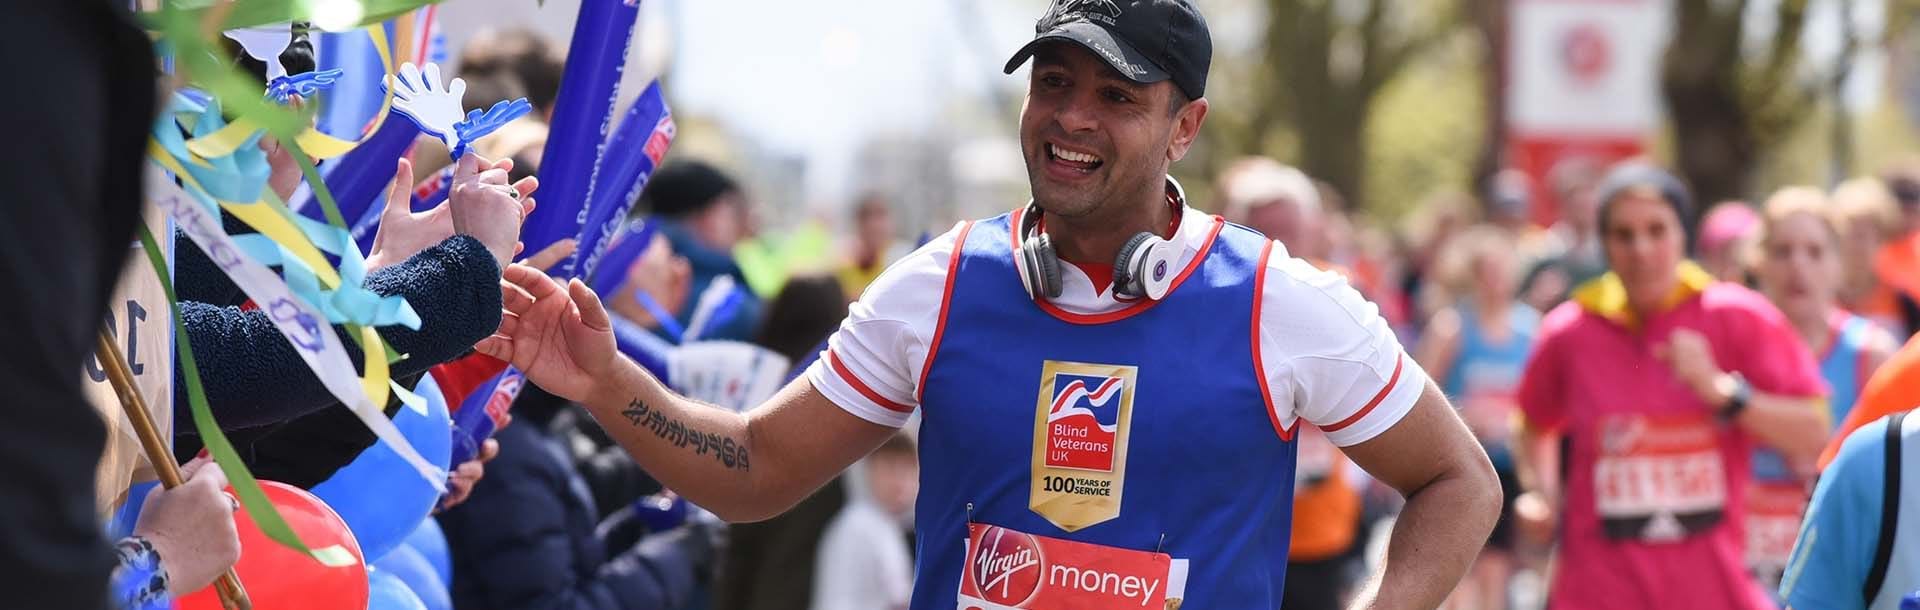 A photo of supporter Dominic running the London Marathon